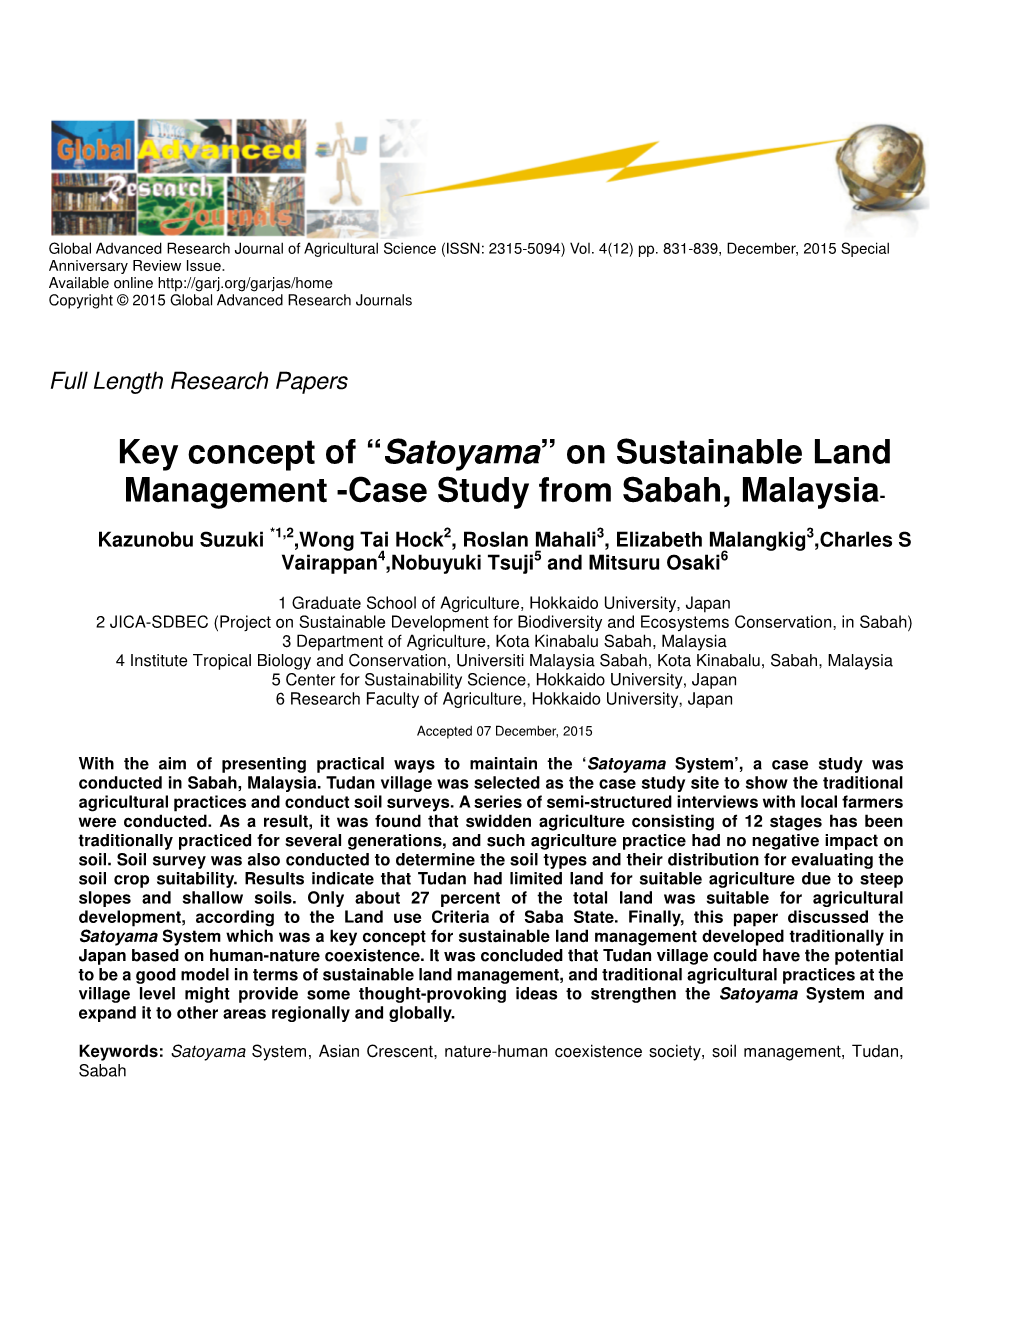 On Sustainable Land Management -Case Study from Sabah, Malaysia